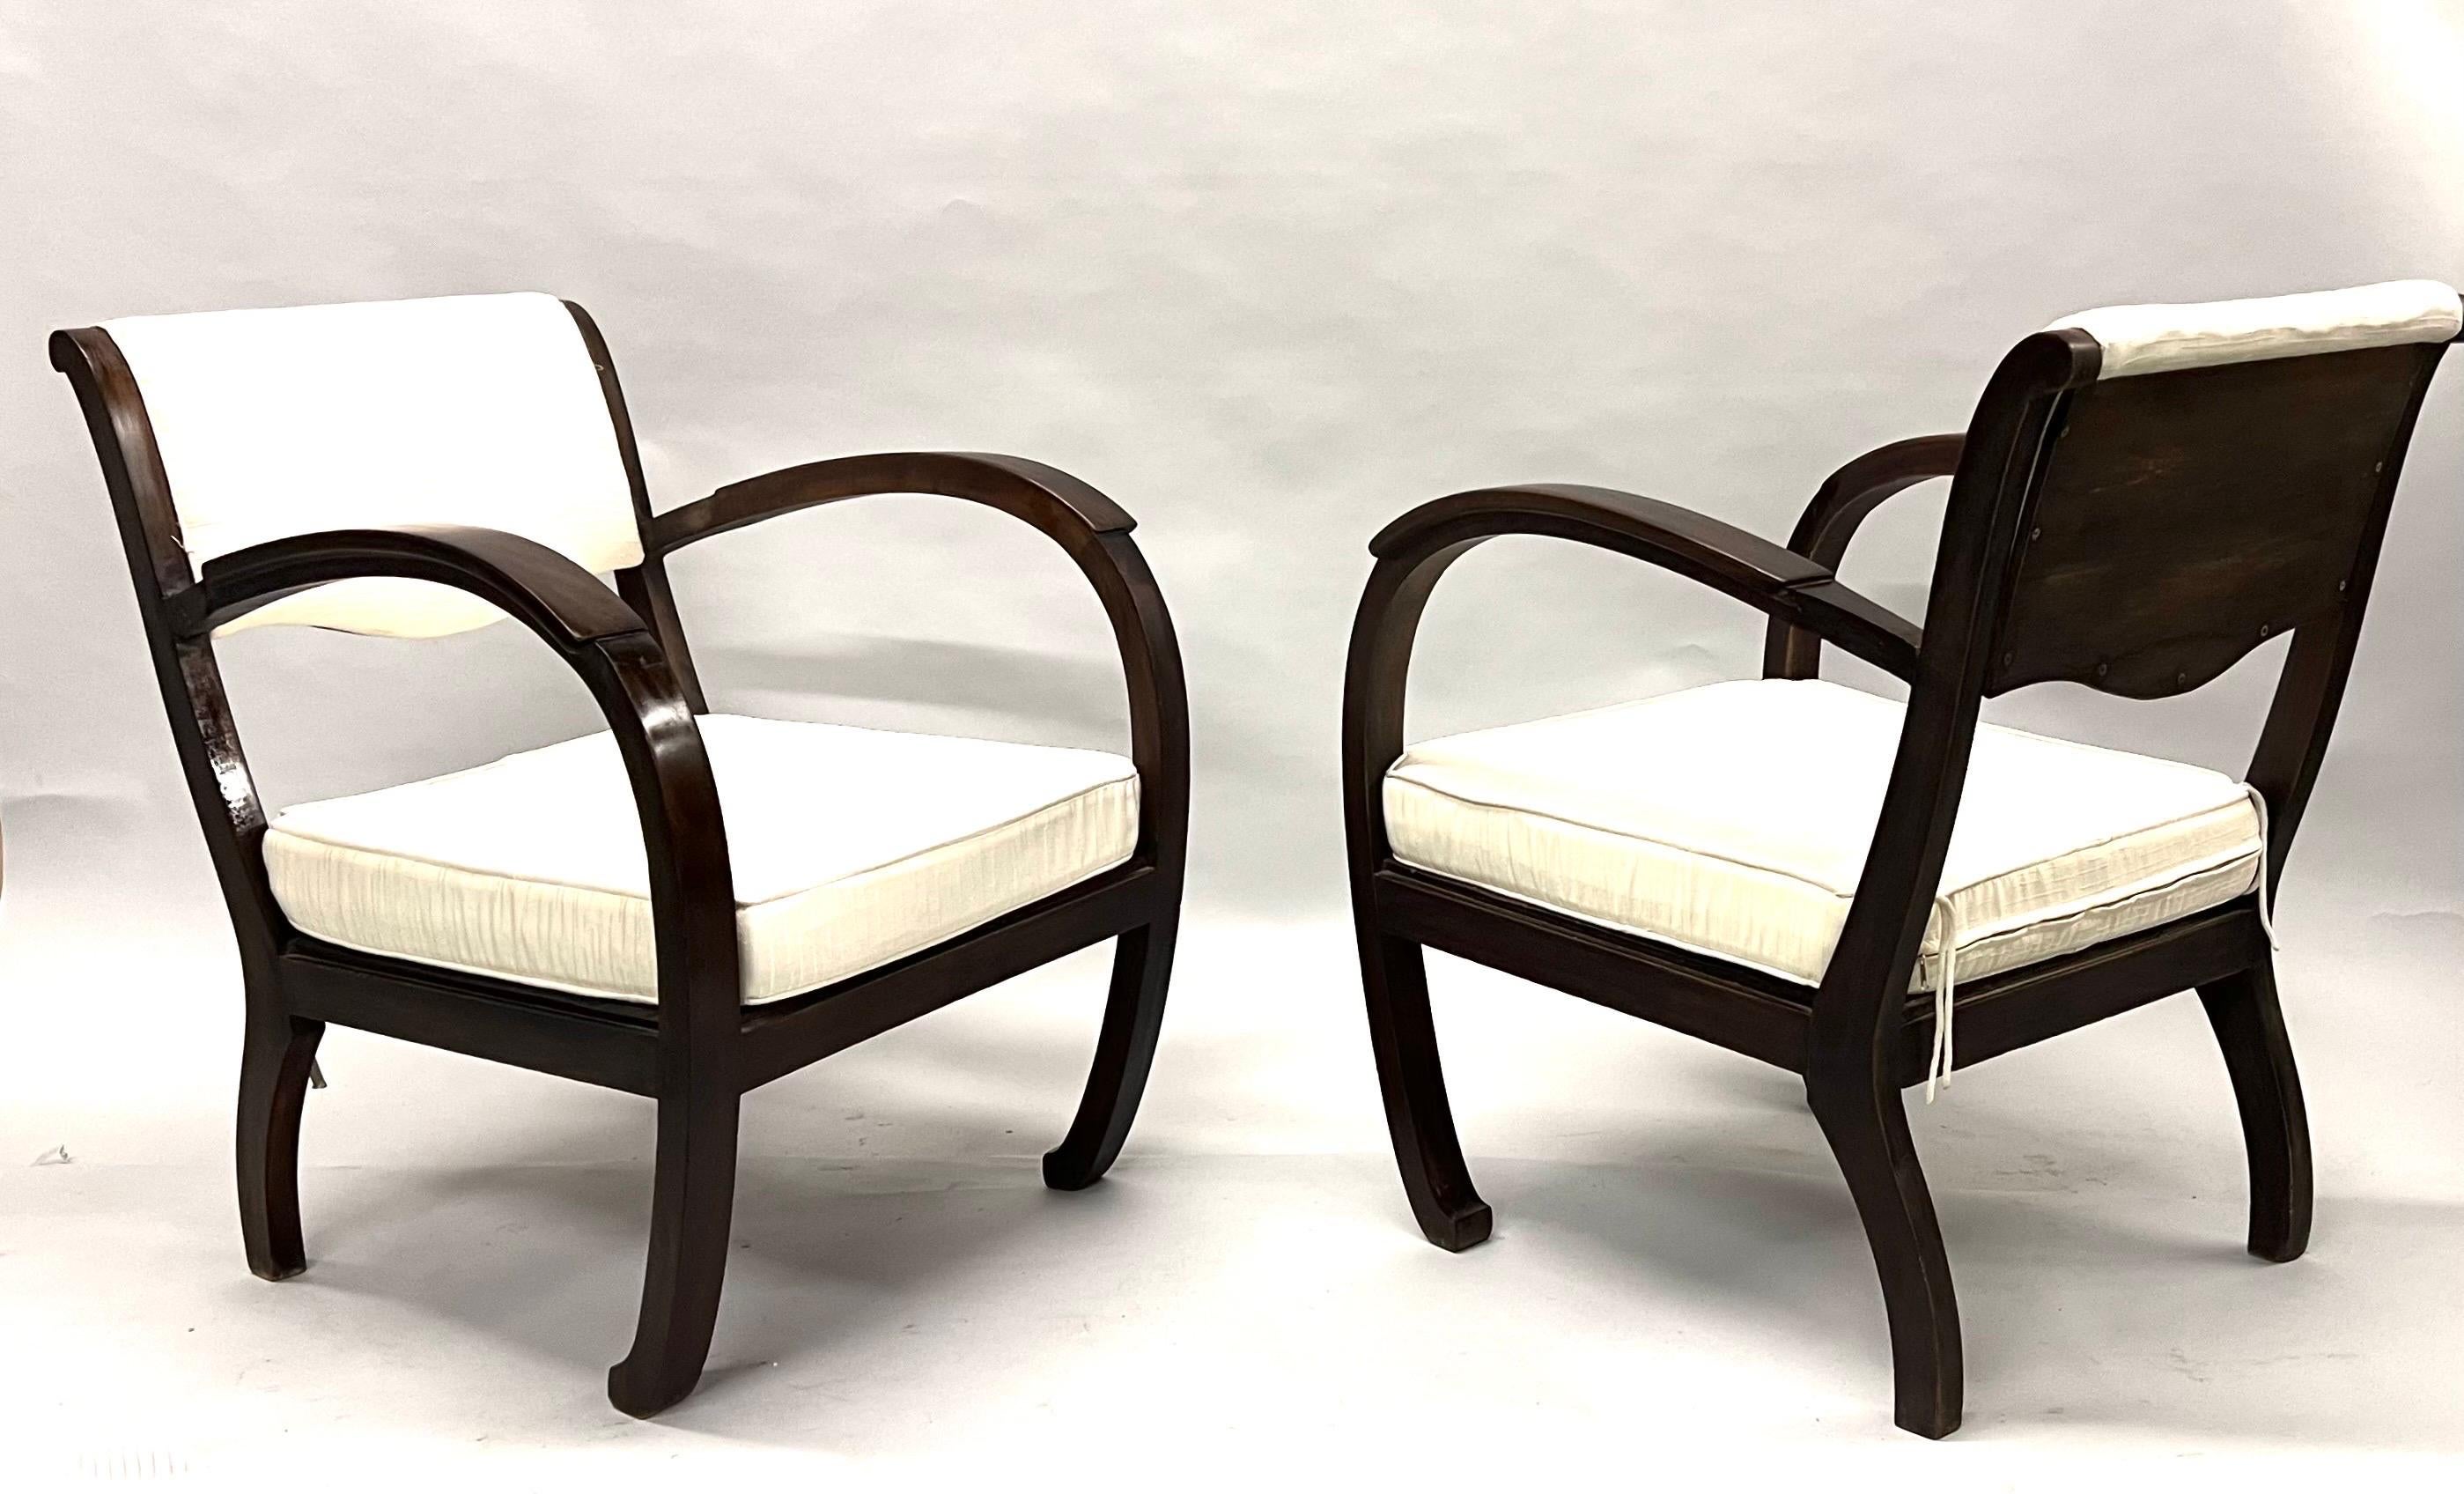 A Rare Pair of French Art Deco Hand Carved Teak armchairs / Lounge or Club Chairs circa 1920 - 1930. The chairs are hand made of pure, solid teak and possess a unique, iconic form. The arms are curved and sweeping and form a continuous arc with the